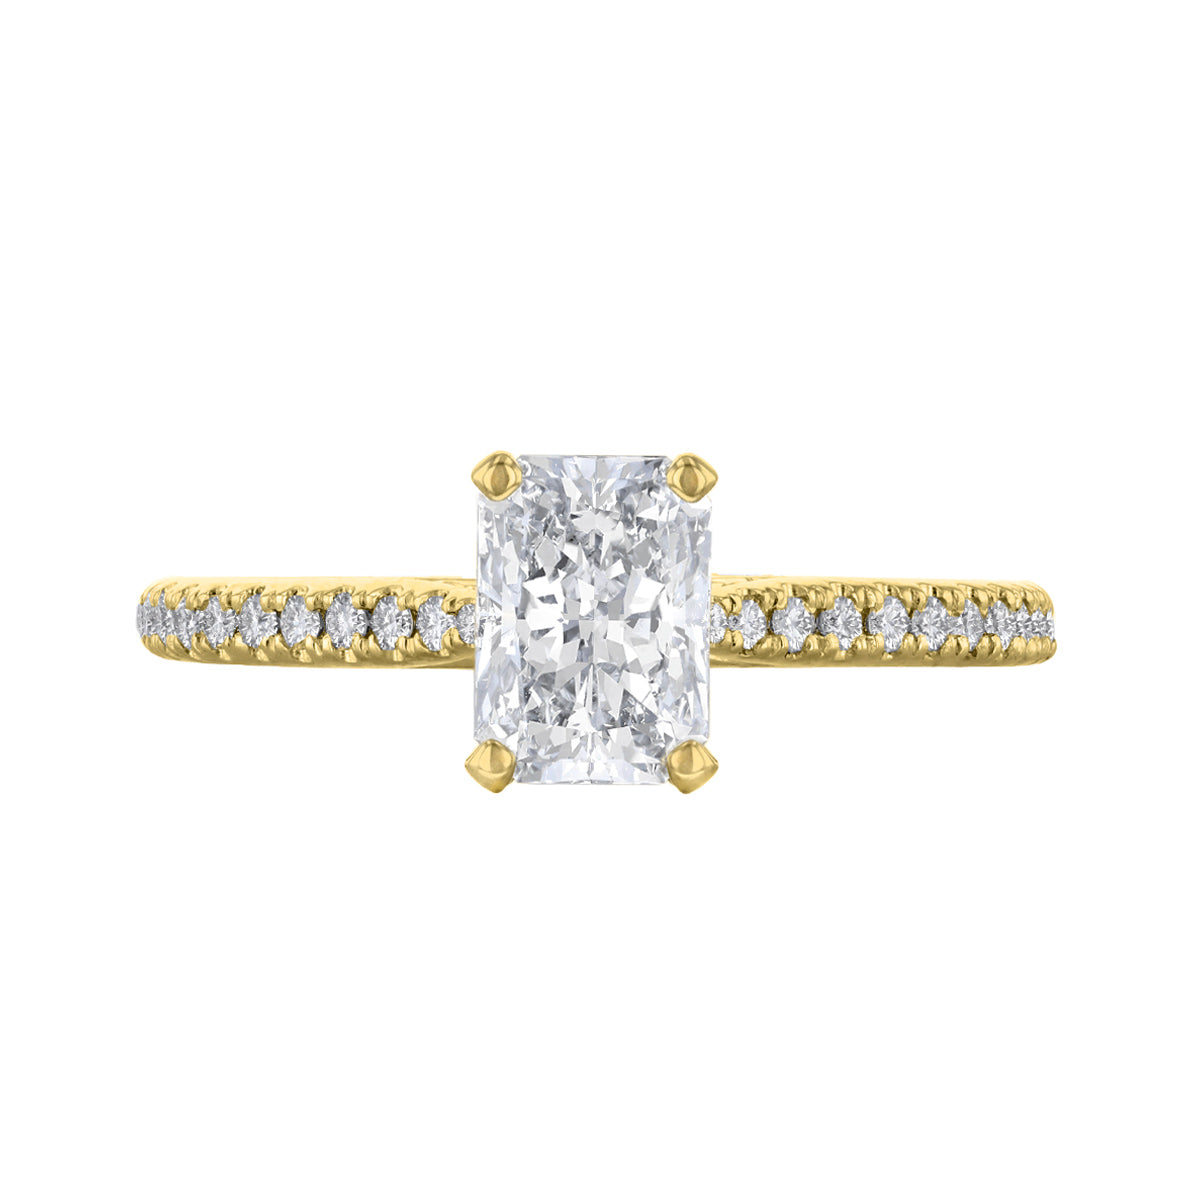 1-00ct-ophelia-shoulder-set-radiant-cut-solitaire-diamond-engagement-ring-18ct-yellow-gold